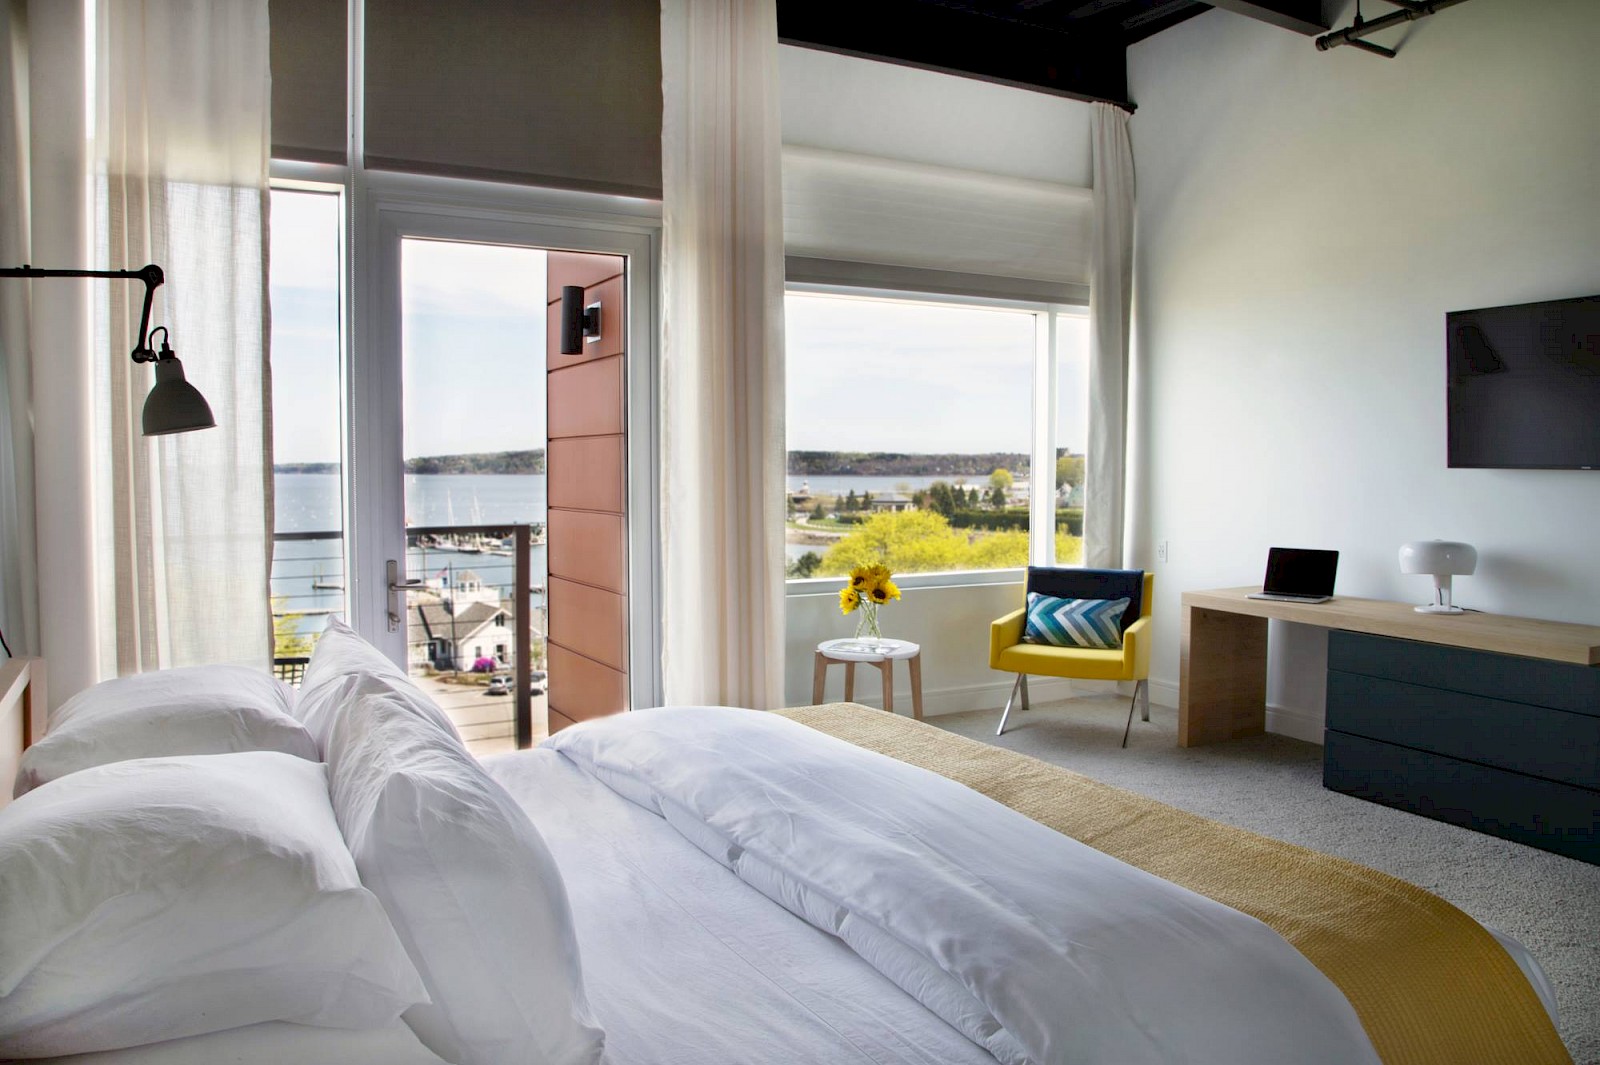 guest room with ocean view